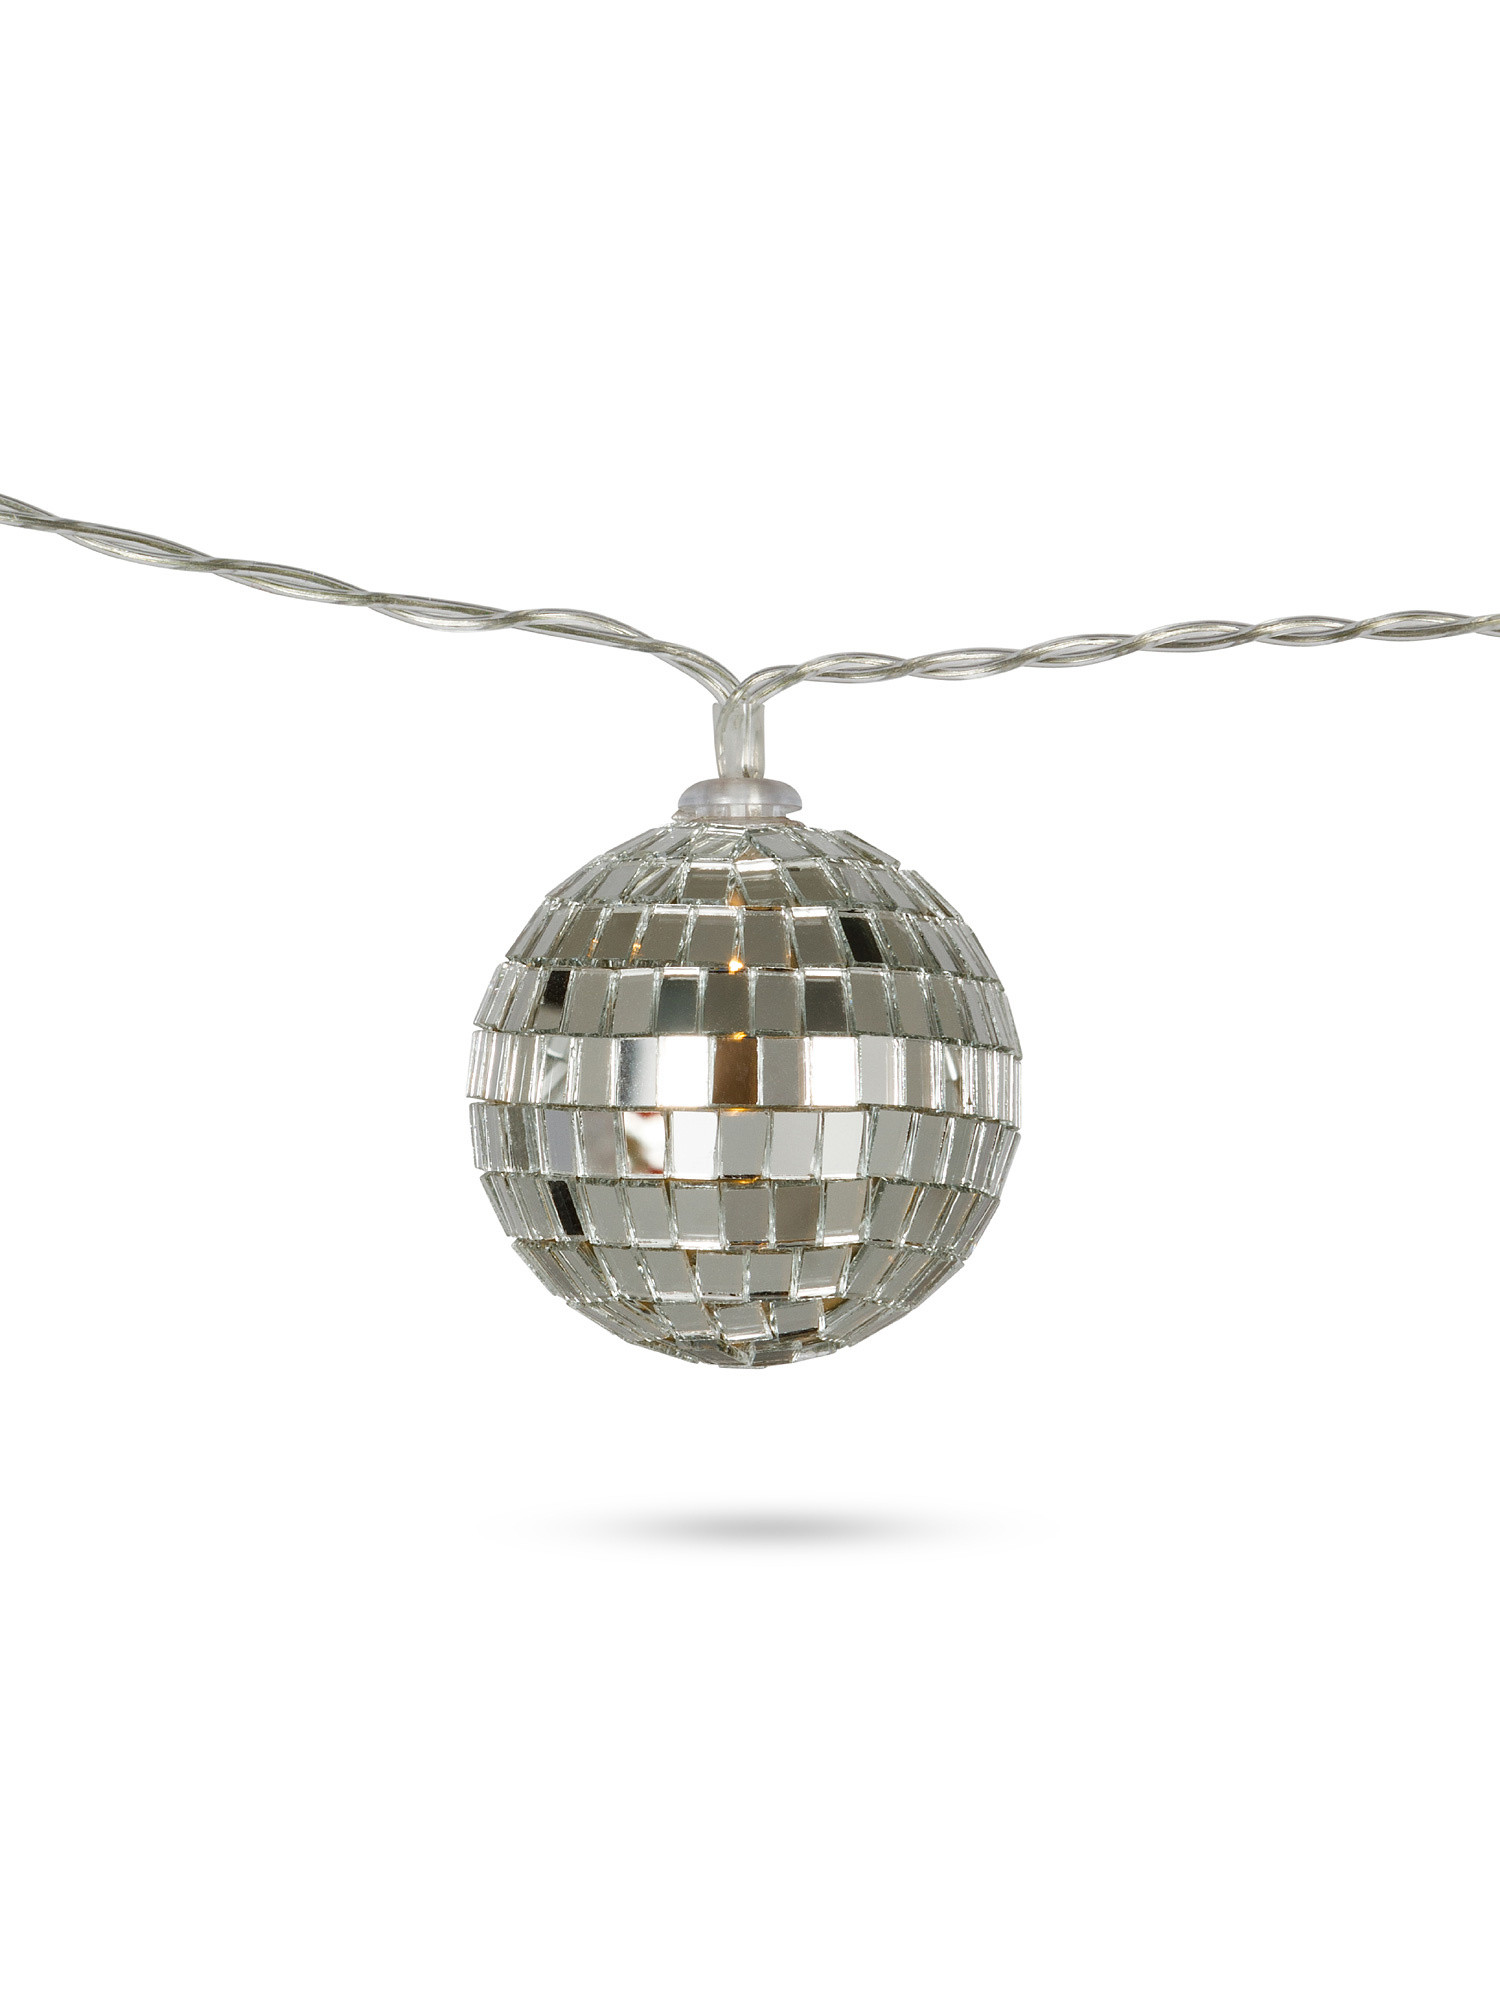 10 LED mirror ball chain, Silver Grey, large